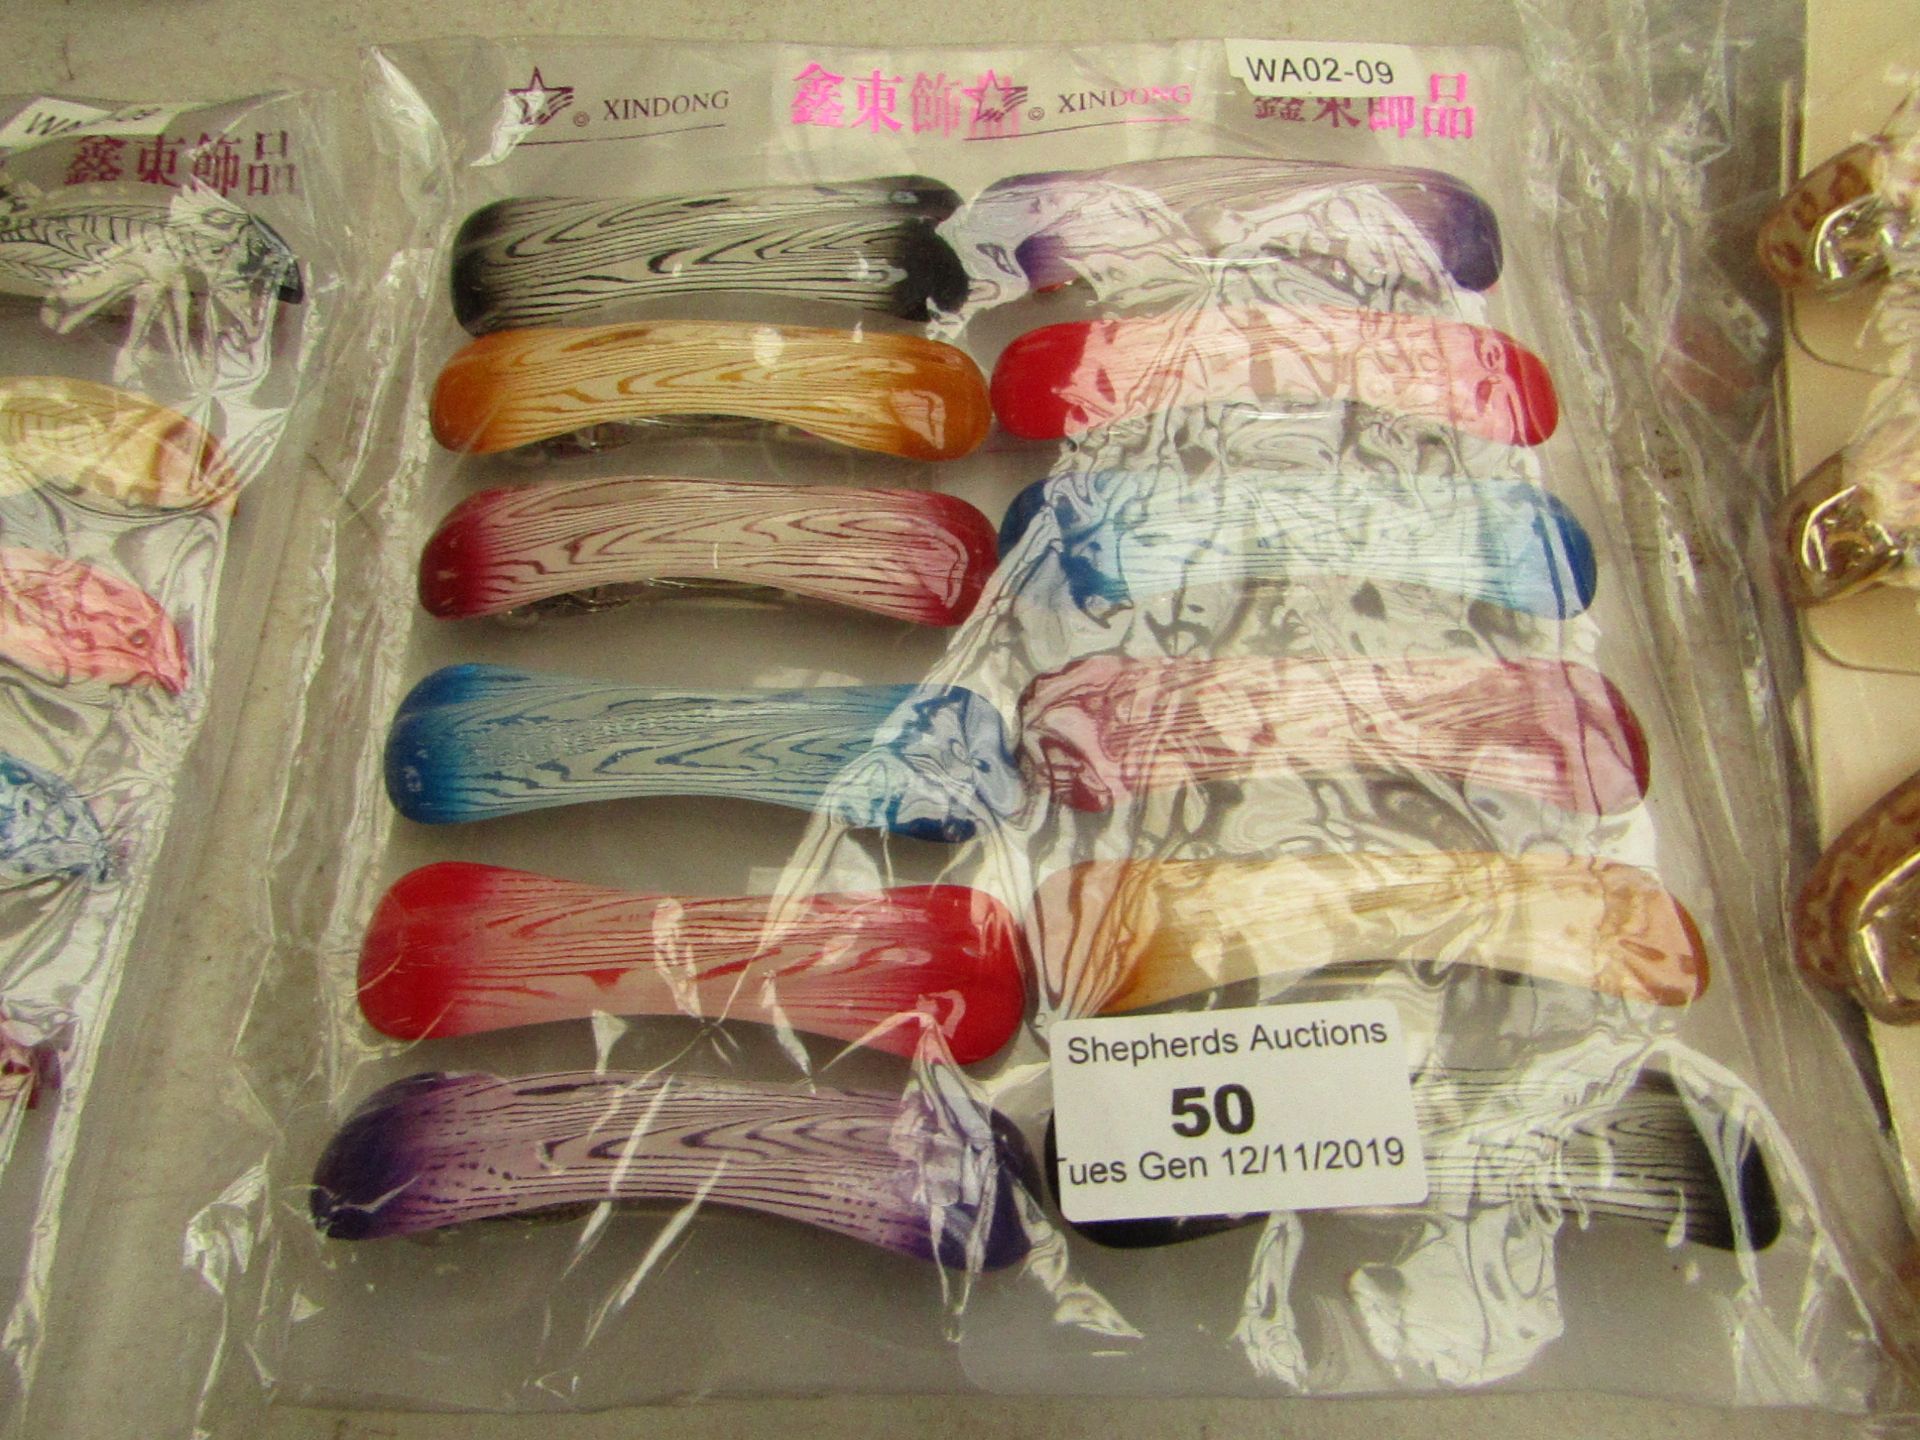 12x Hairs clips, see picture for design, new and packaged.